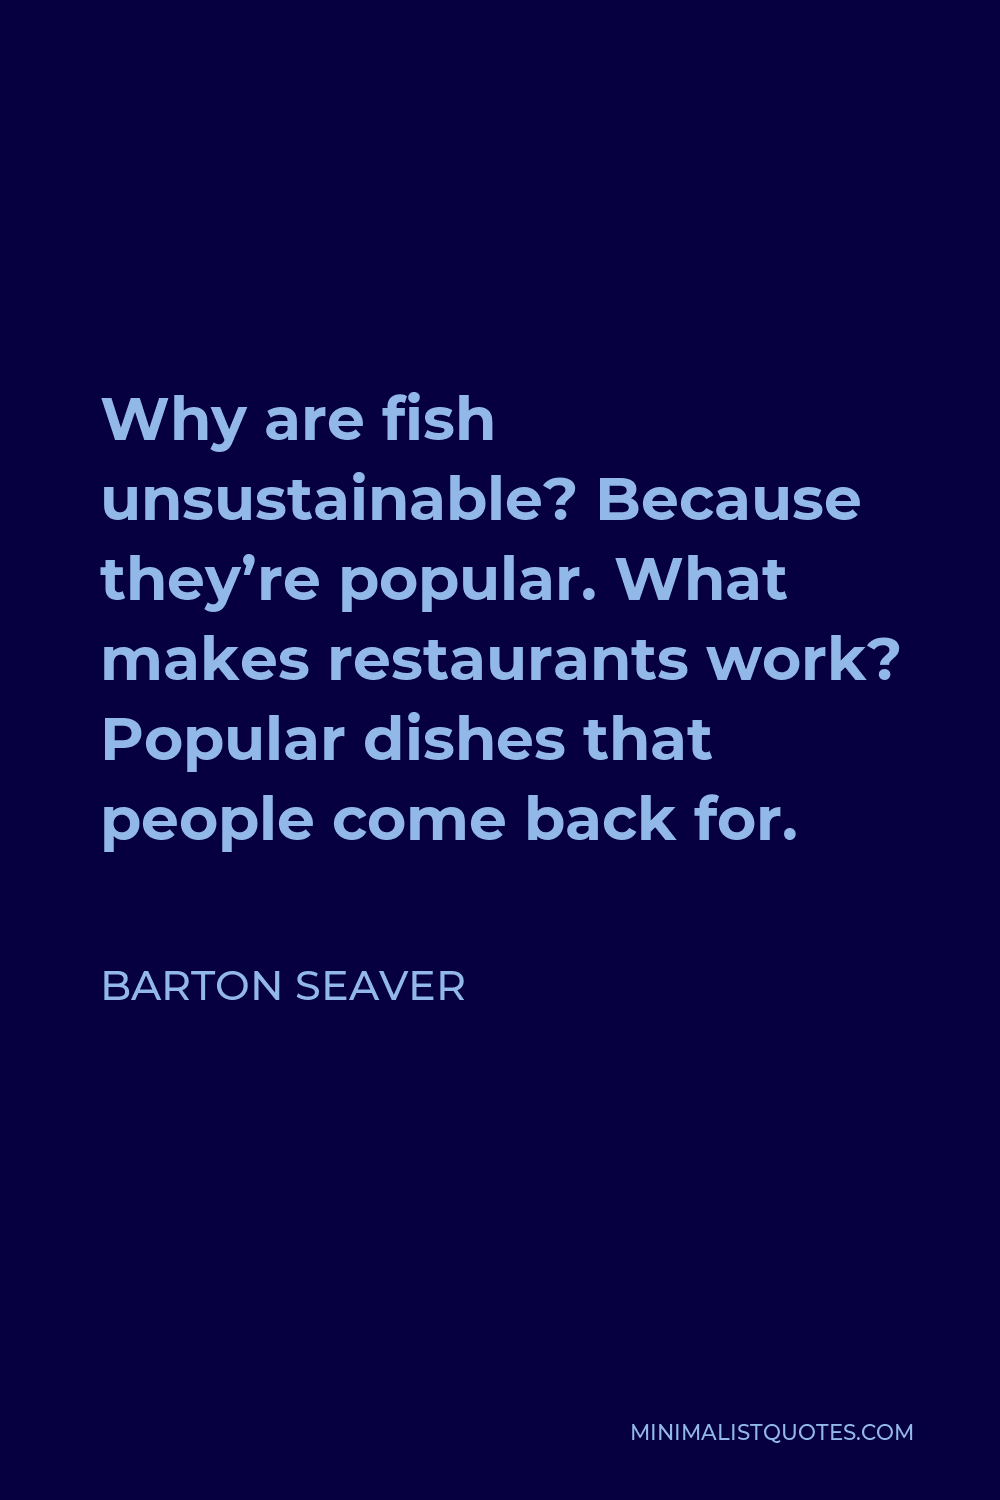 Barton Seaver Quote - Why are fish unsustainable? Because they’re popular. What makes restaurants work? Popular dishes that people come back for.